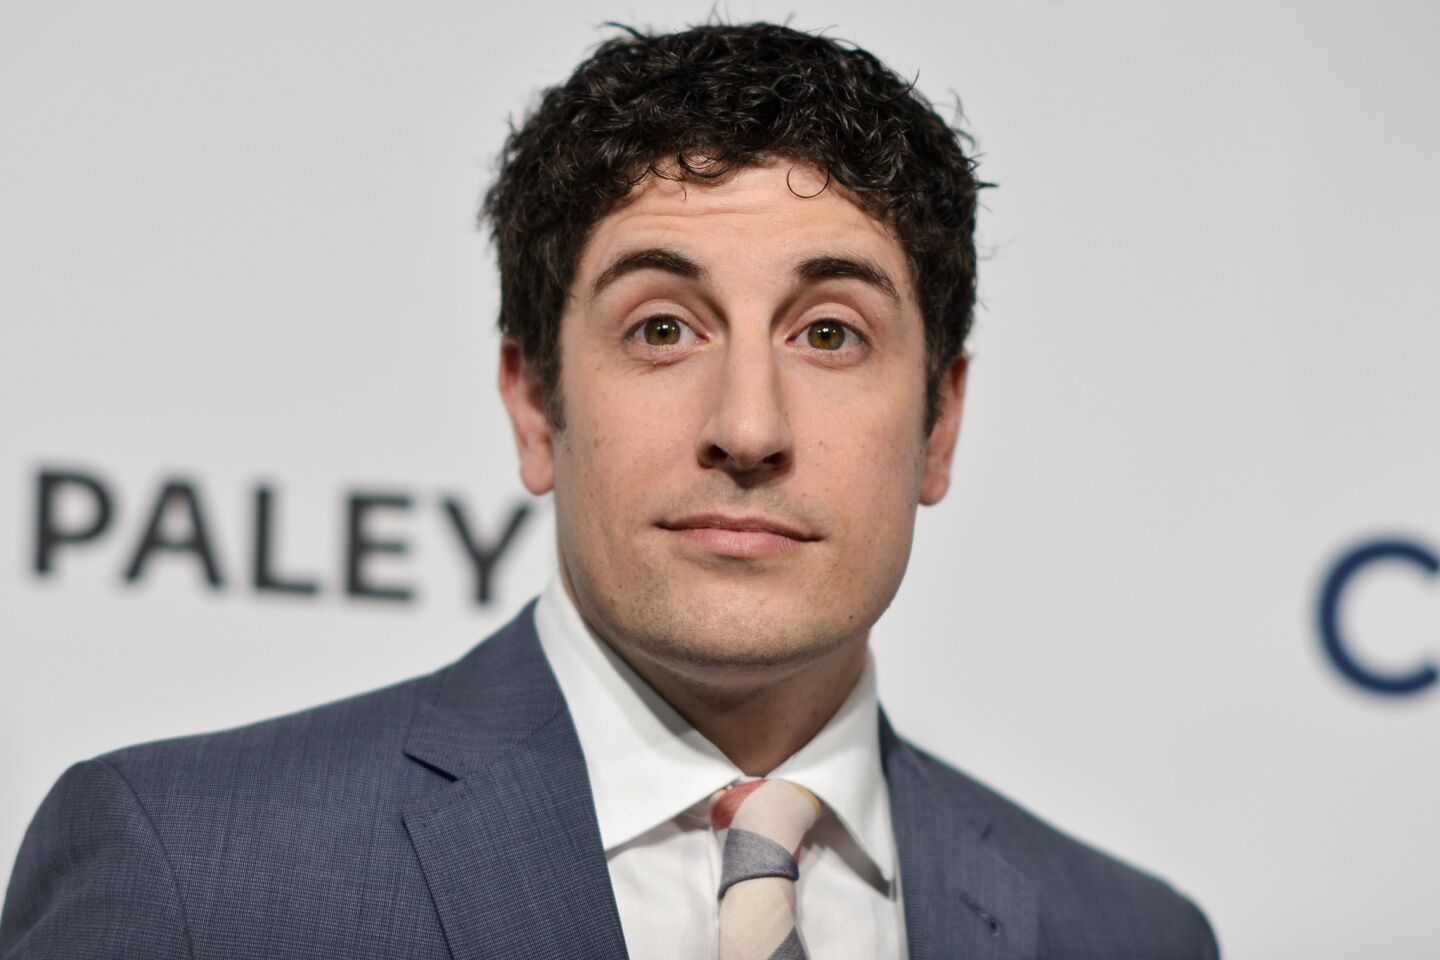 "American Pie" actor Jason Biggs and his wife, actress Jenny Mollen, have welcomed a little one to their family named Sid Biggs. Mollen documented her birth process on Instagram, and when the little guy was born, she posted a full-face shot of her son with the caption, "Full head of hair, huge penis, 10k twitter followers." Biggs gave his wife props. "You did amazing, sweetie, I'm so proud of you. So proud of you. He's beautiful." The pair tied the knot in 2008 after meeting on the set of "My Best Friend's Girl."